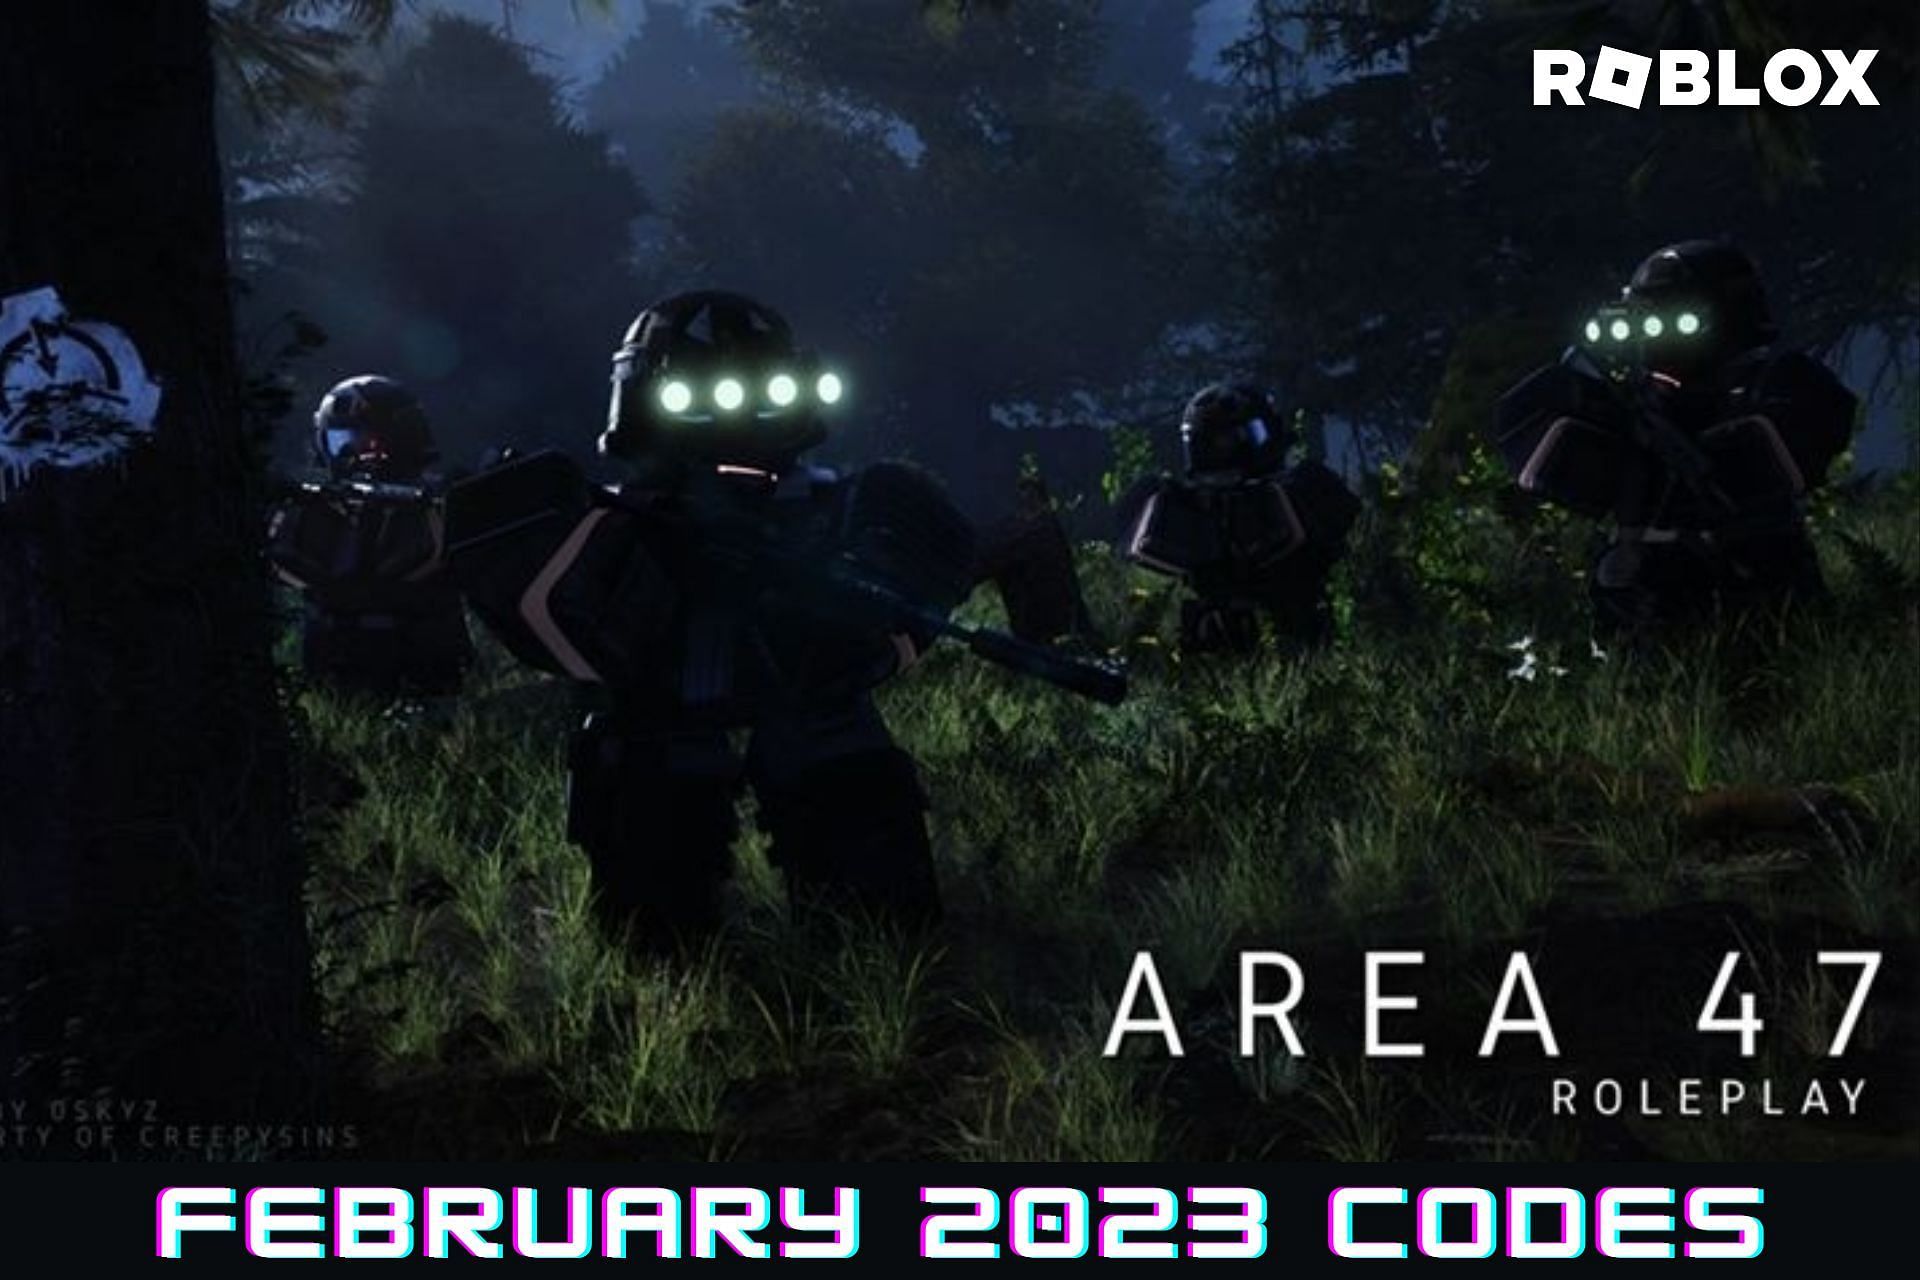 Roblox Area 47 codes for February 2023: Free credits